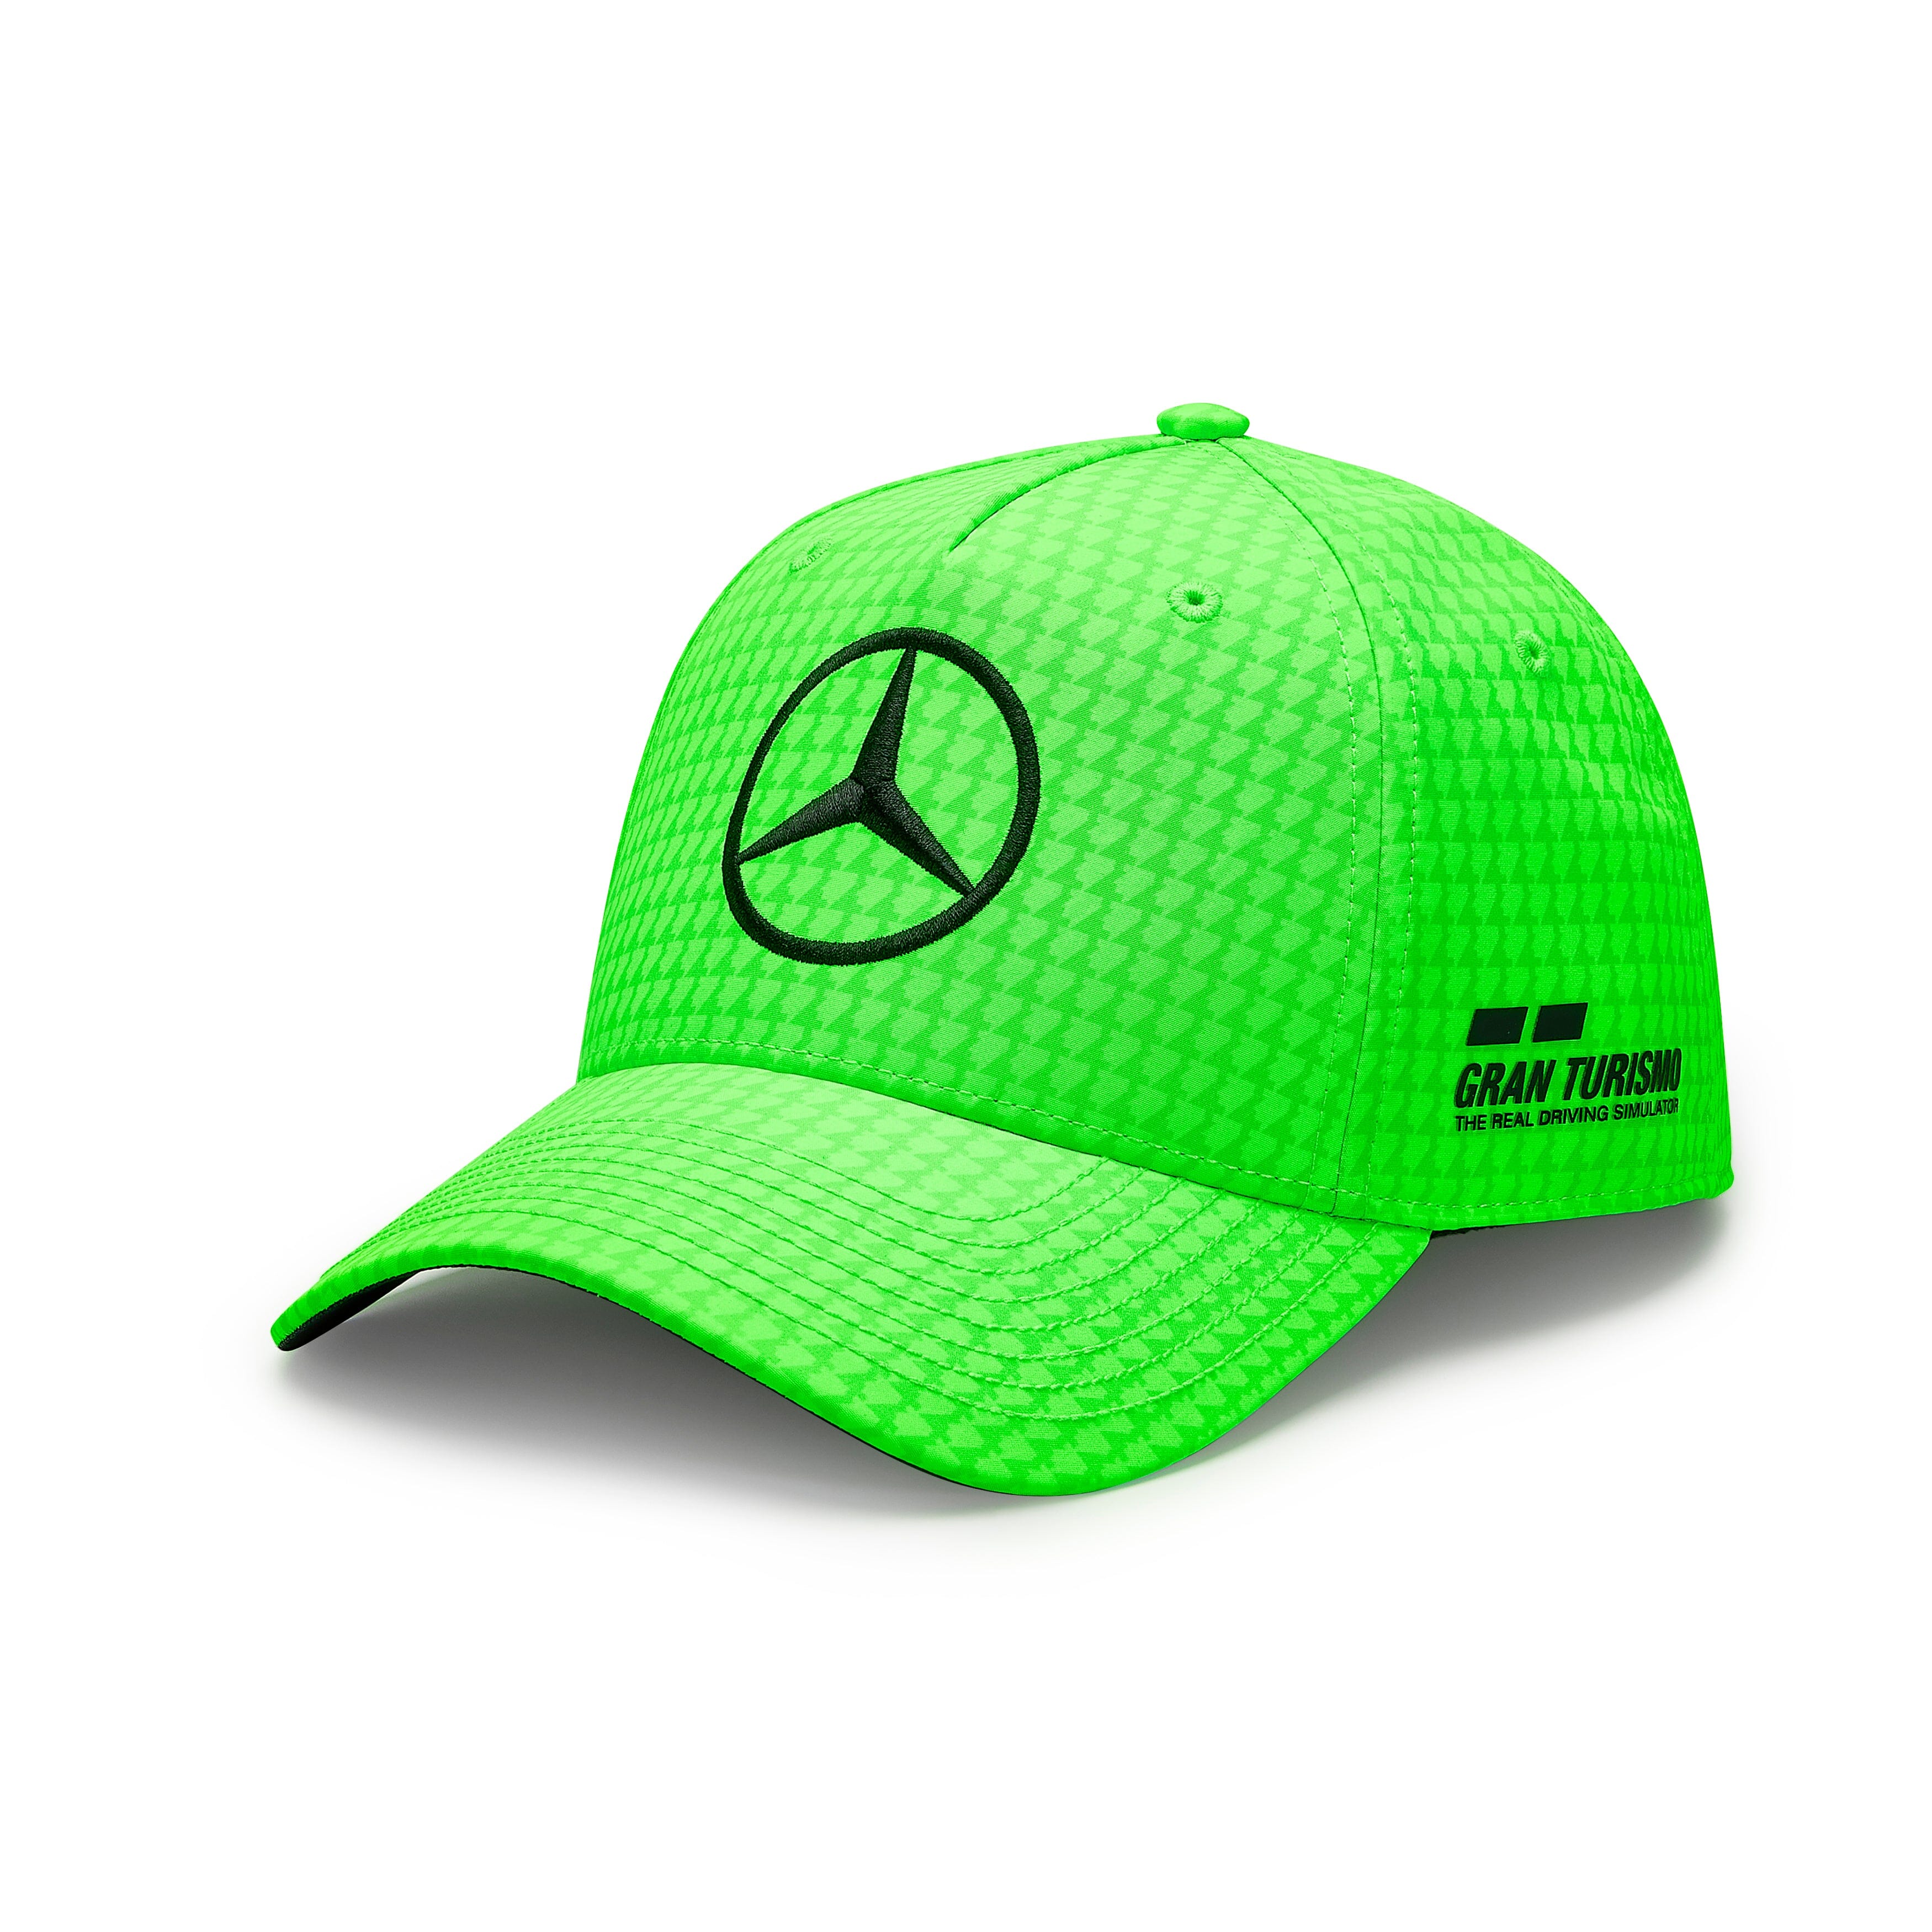 Mercedes AMG F1 Special Edition Kids Lewis Hamilton Silverstone GP Hat- Youth Green